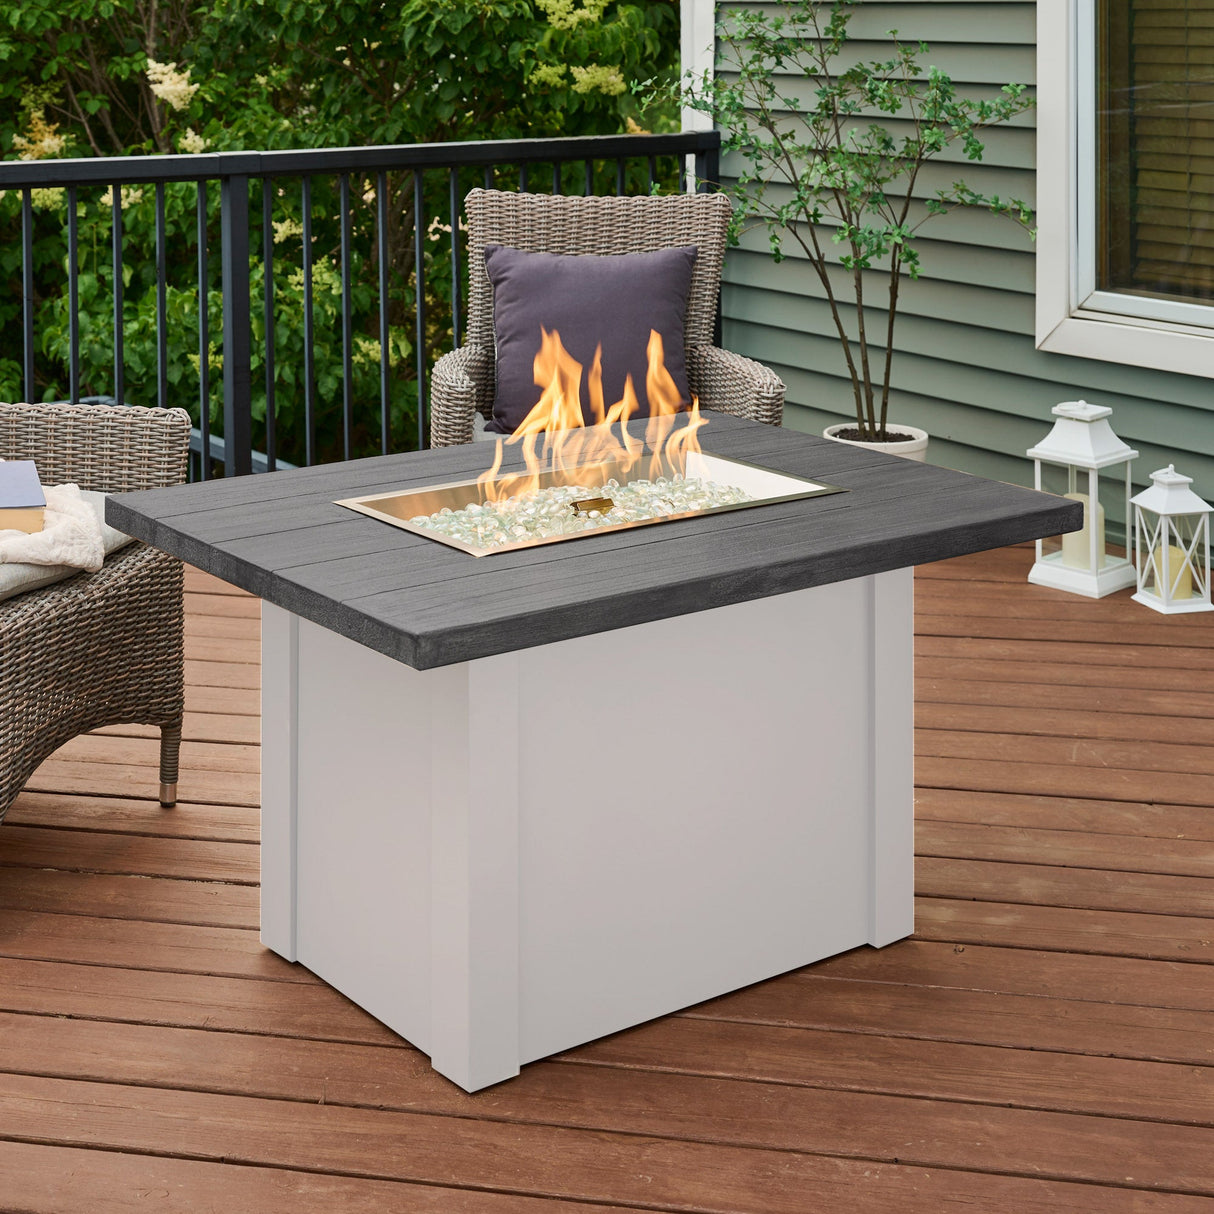 The Havenwood Rectangular Gas Fire Pit Table with a Carbon Grey top and White base on an outdoor patio setup